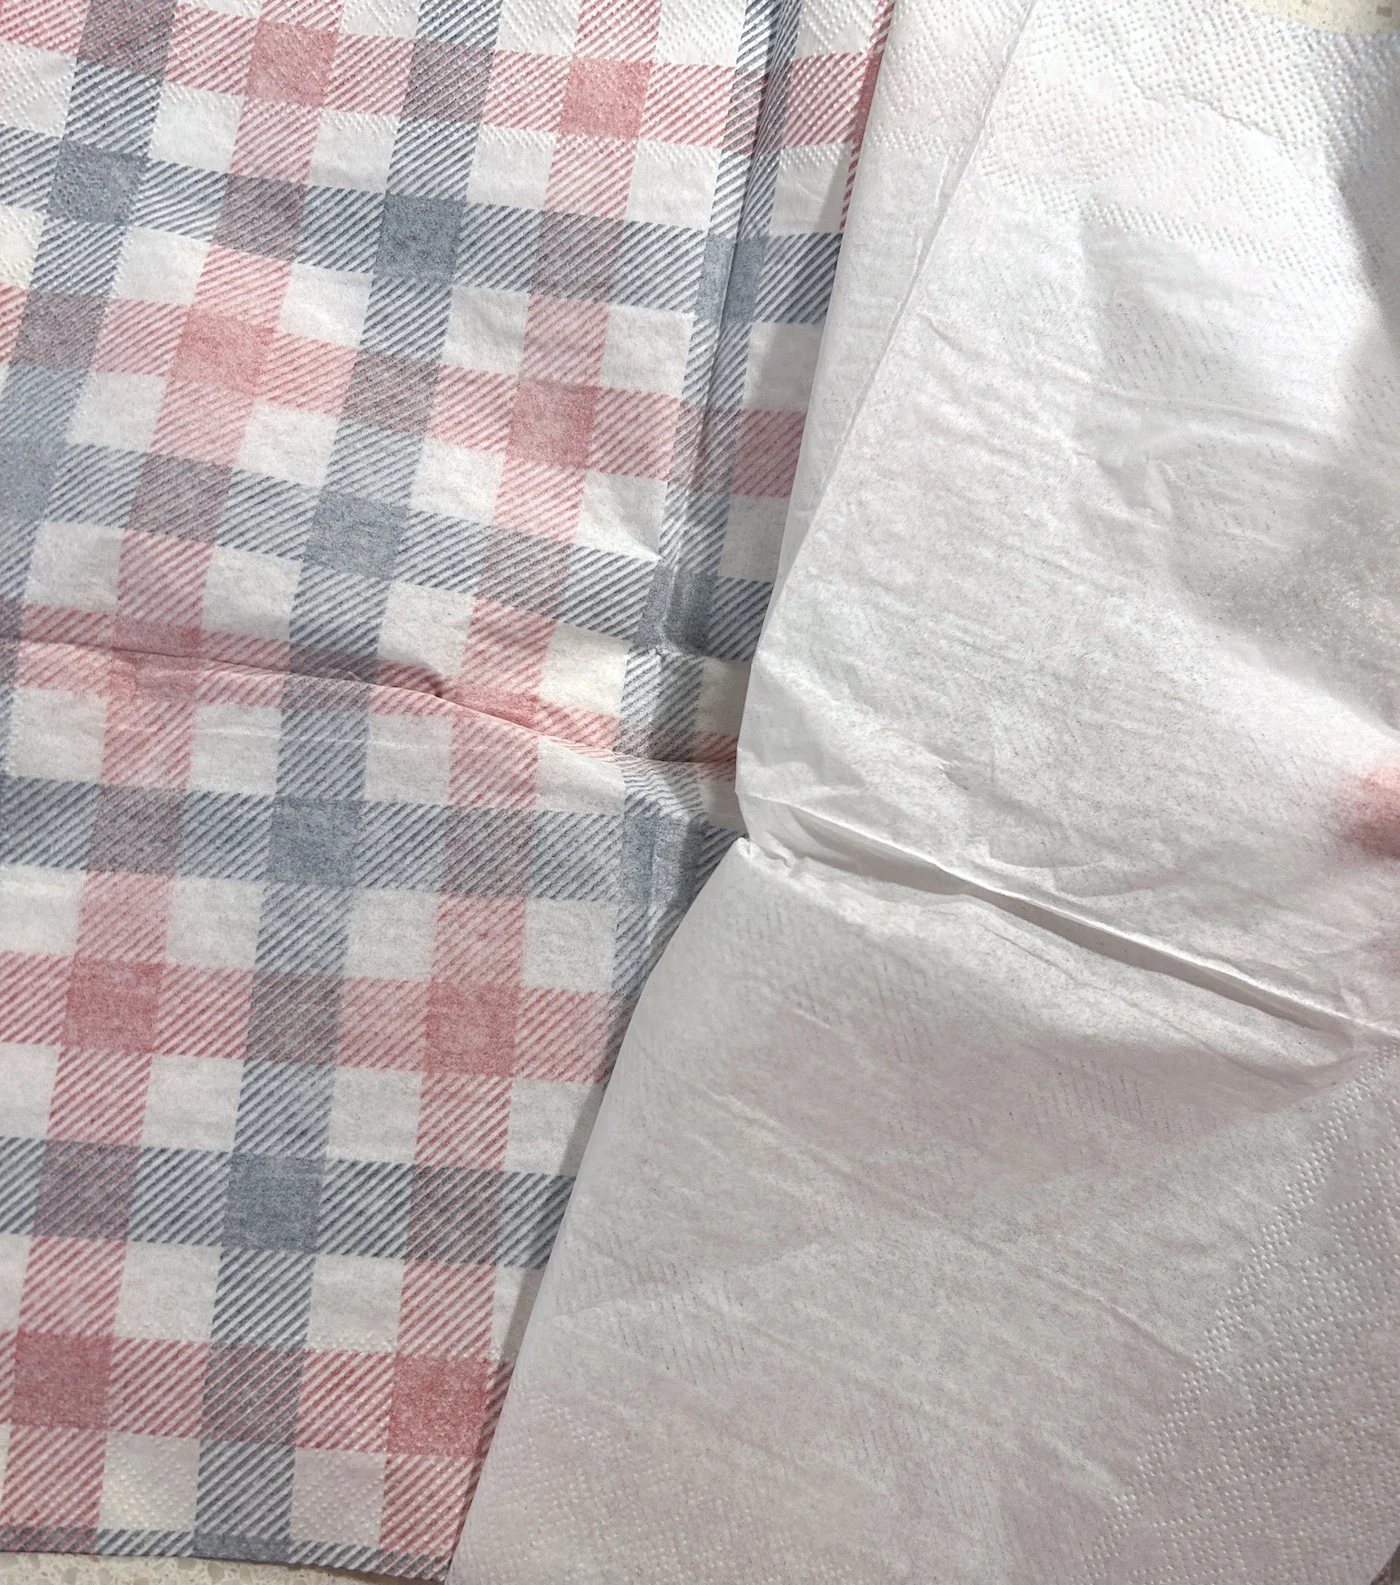 Separating red and blue plaid napkin layers